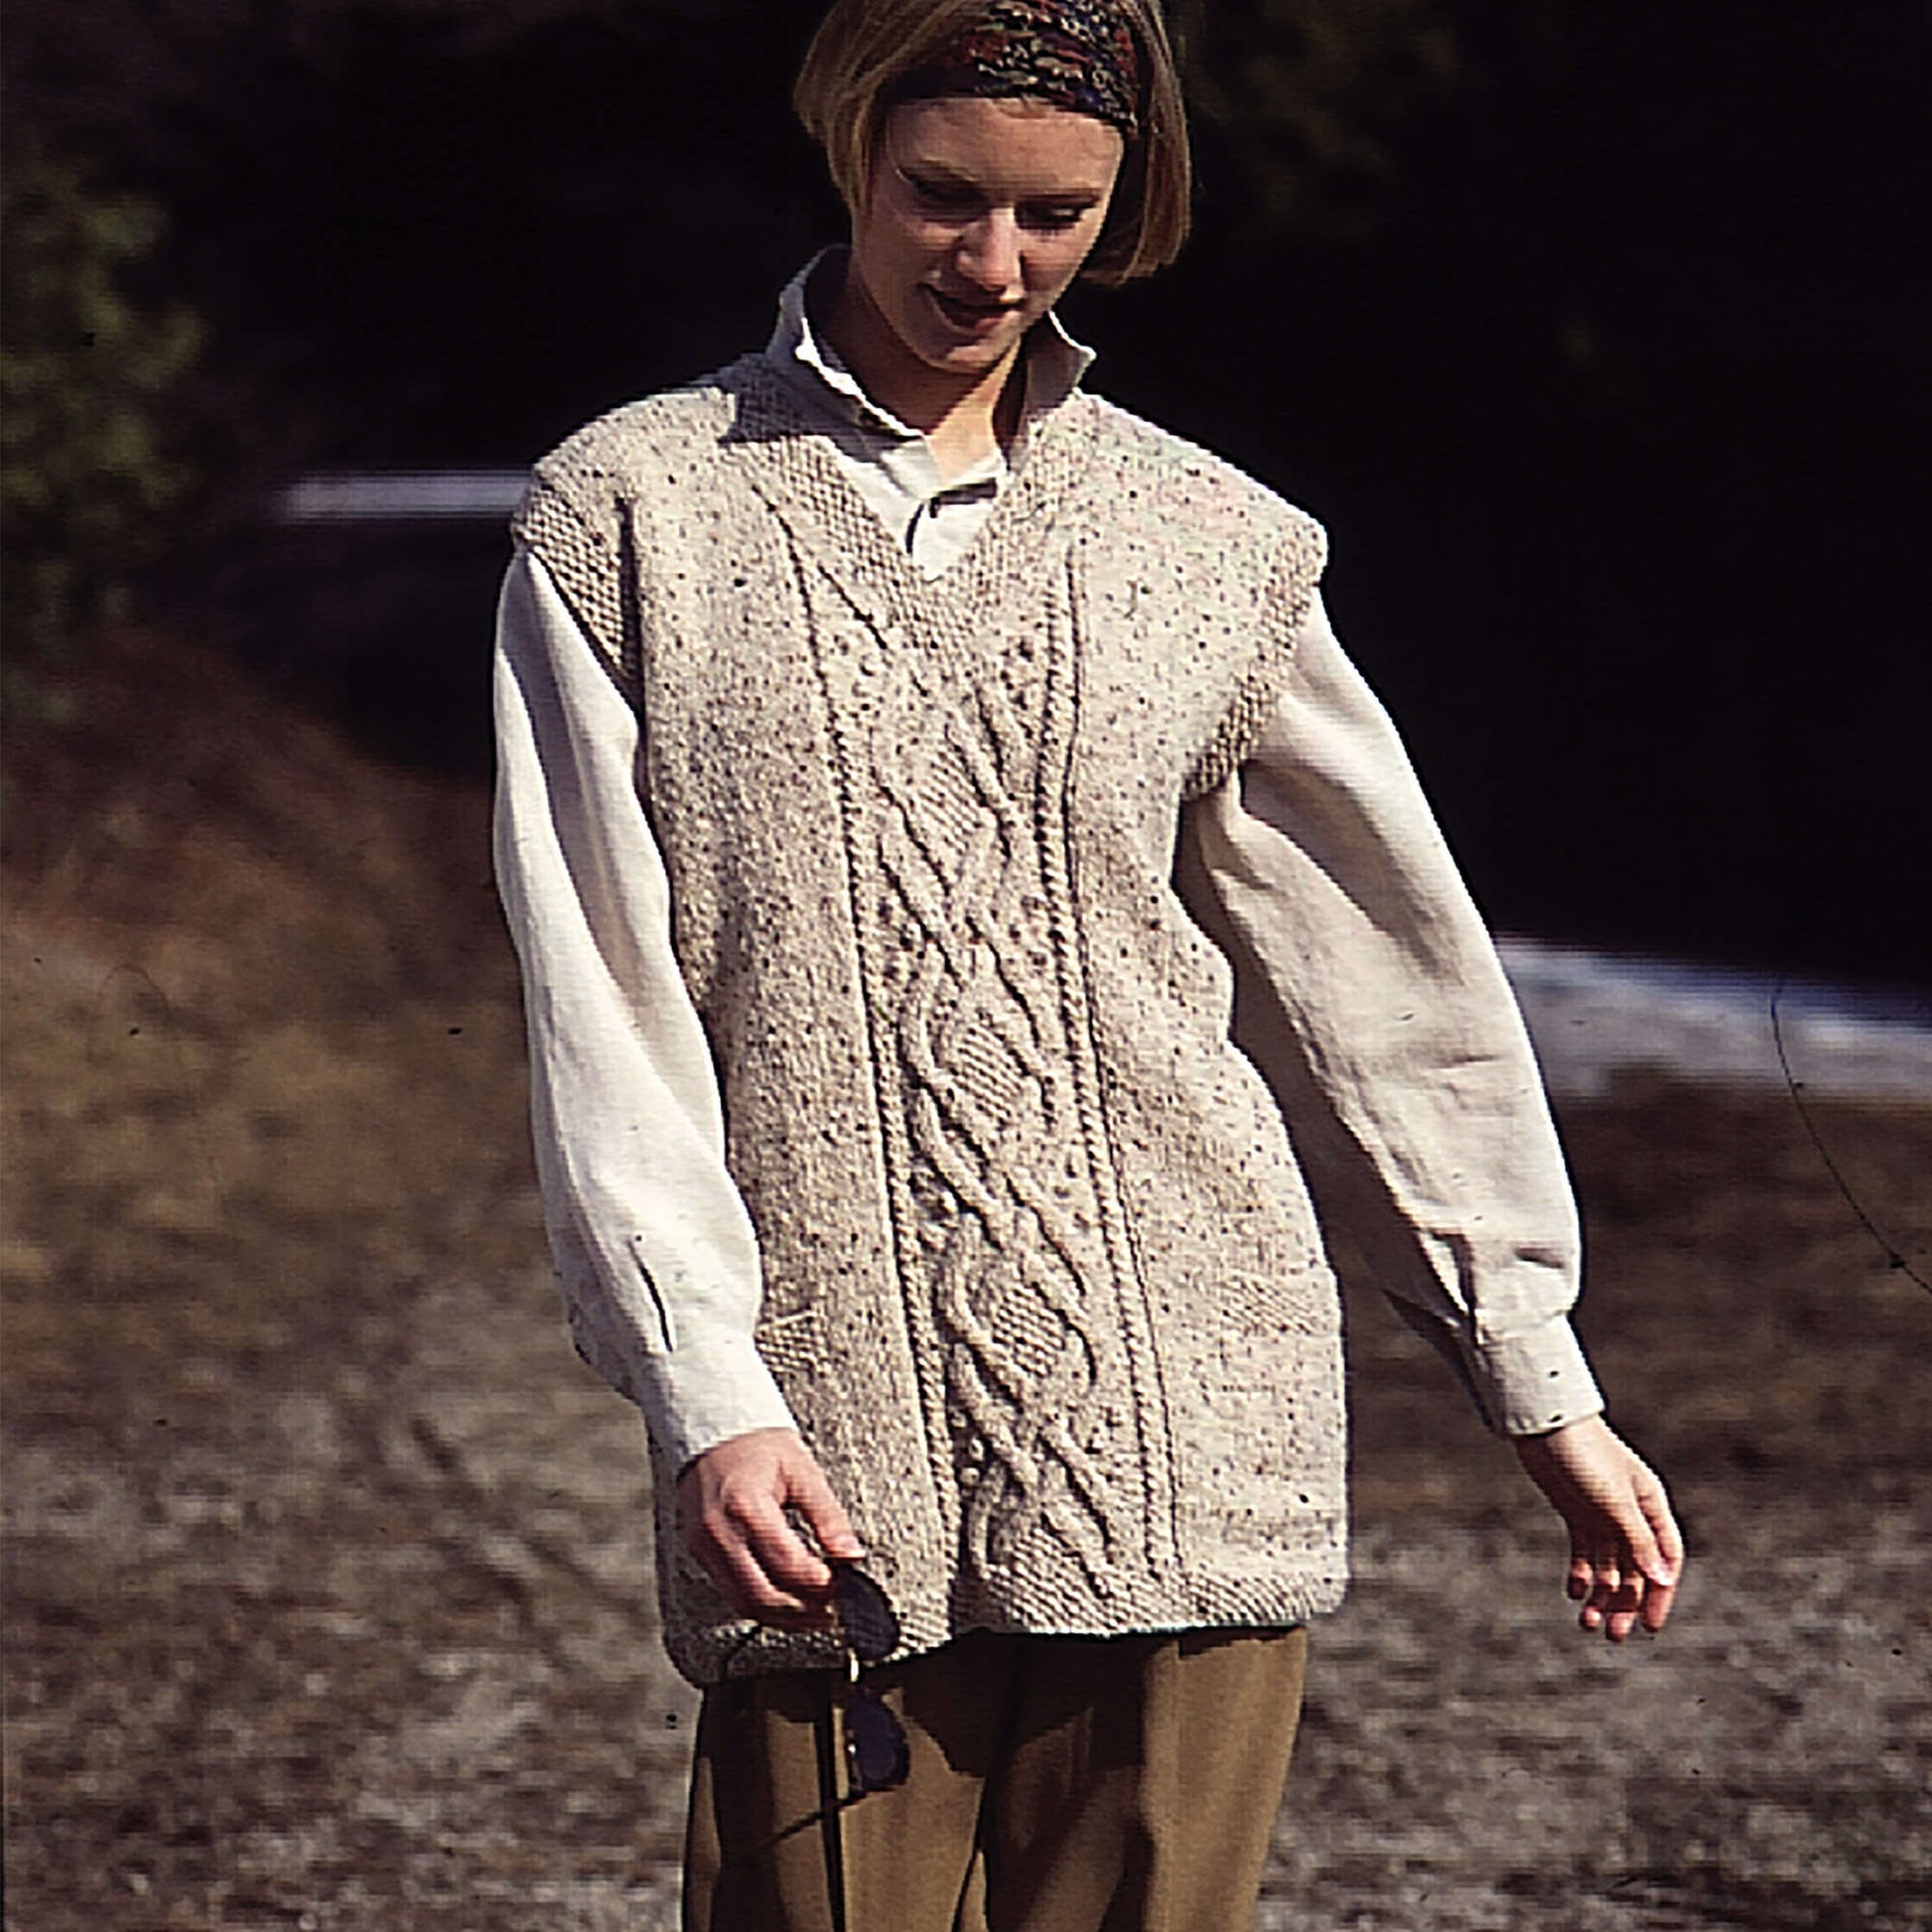 Irish Knit Sweaters Patterns with Celtic Cables